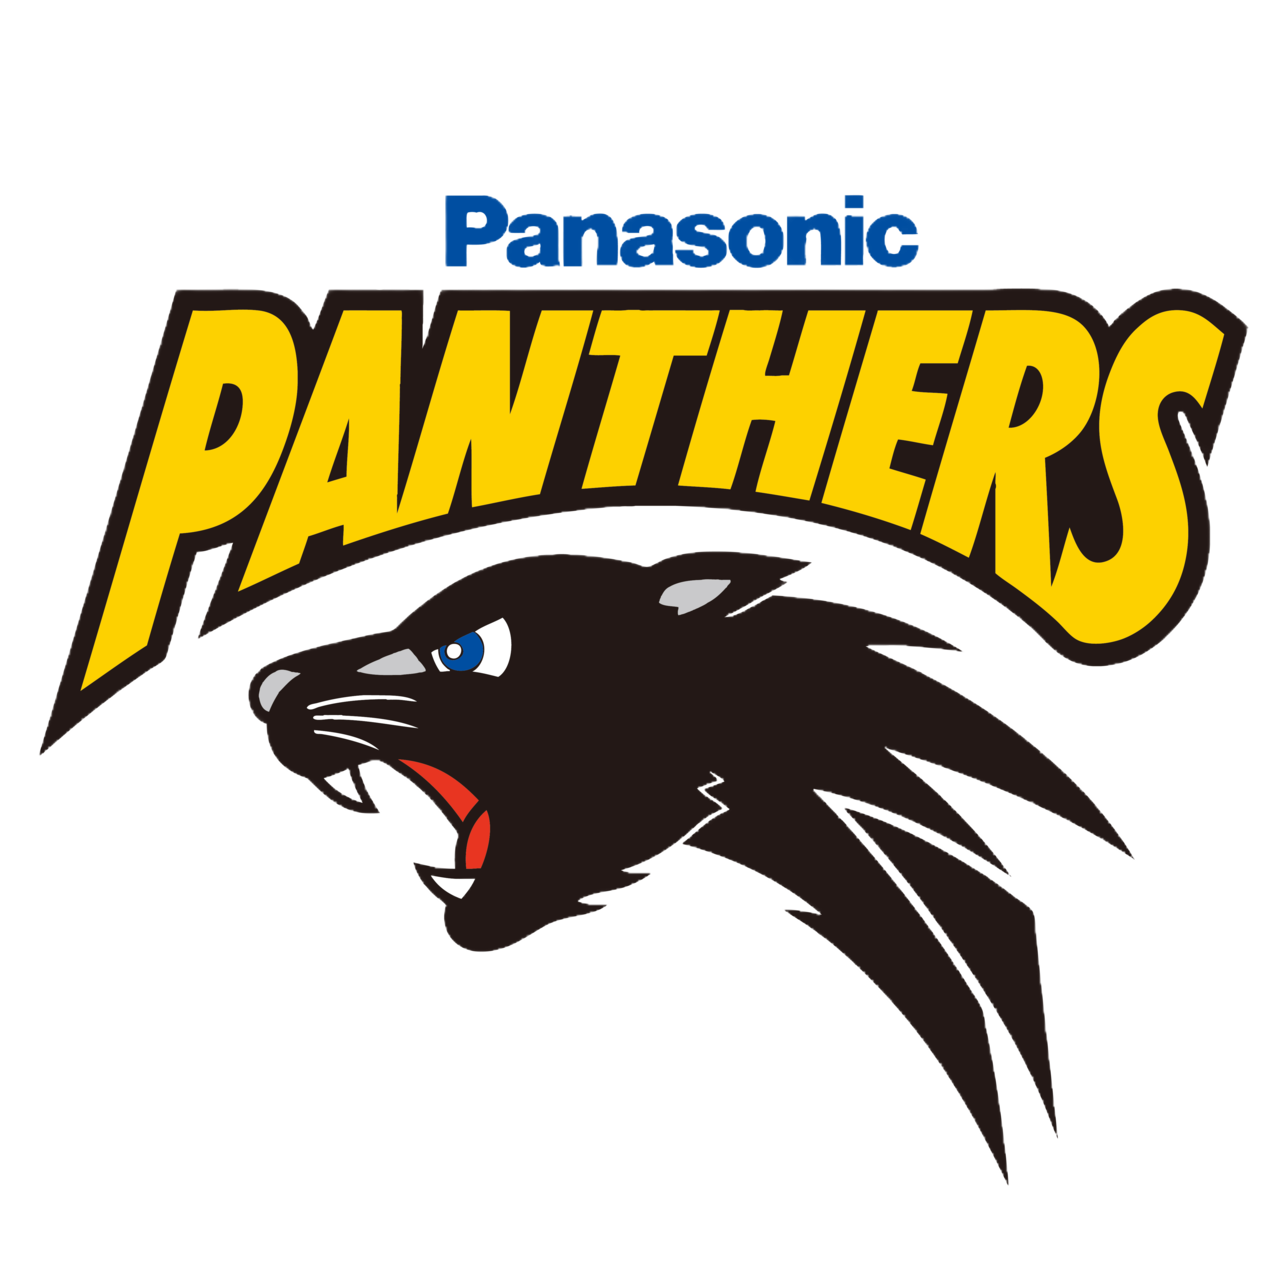 Team_panthers.gif